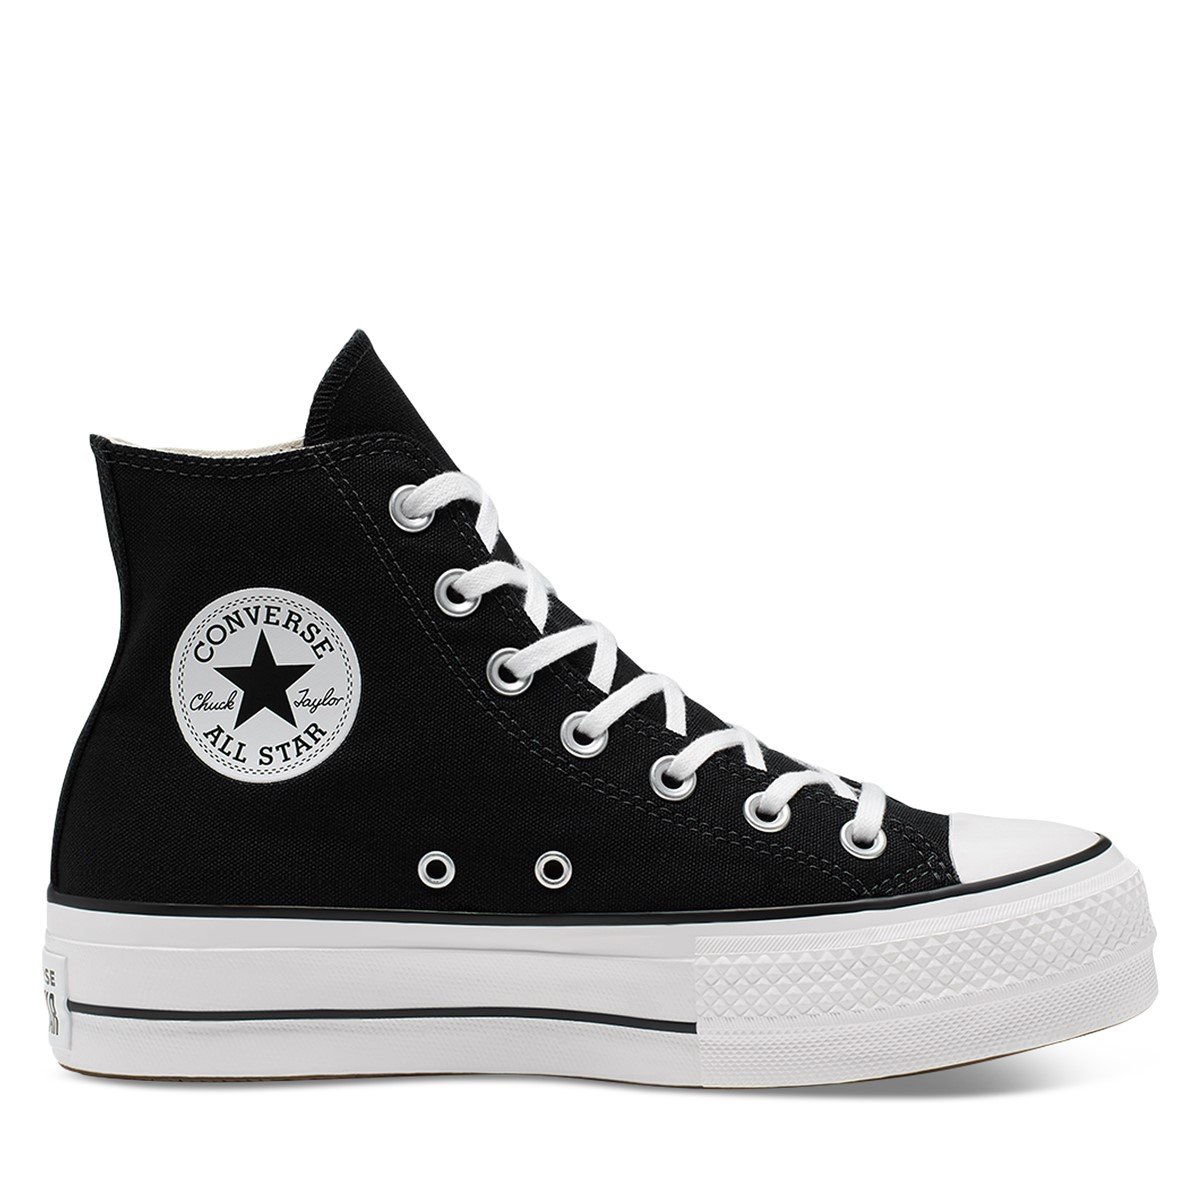 Women's Chuck Taylor All-Star Lift Sneakers in Black/White